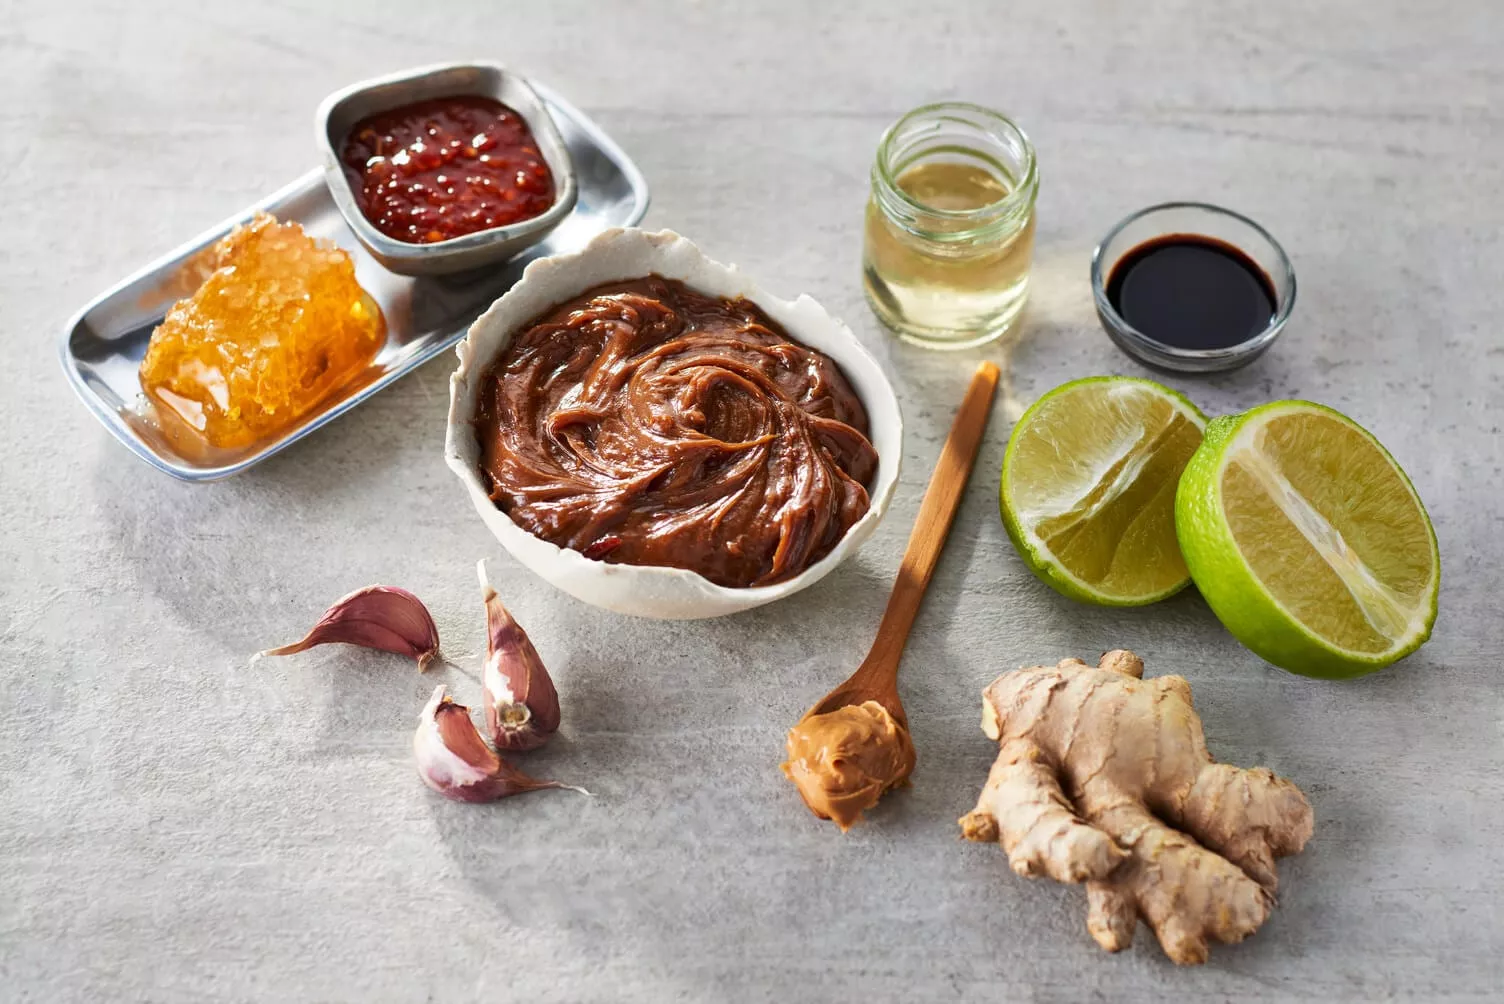 All the ingredients to make a delicious peanut dip.